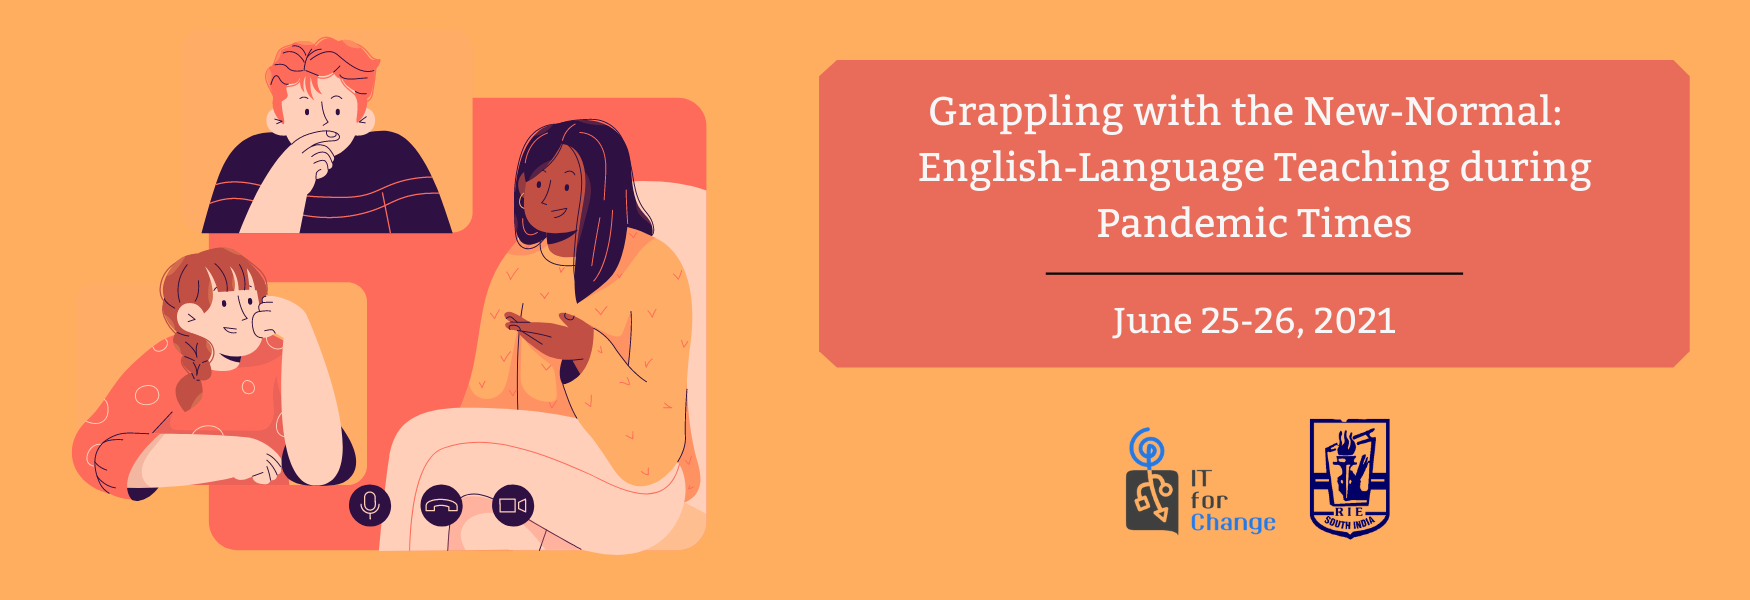 Grappling with  the New Normal: English-Language Teaching during Pandemic Times